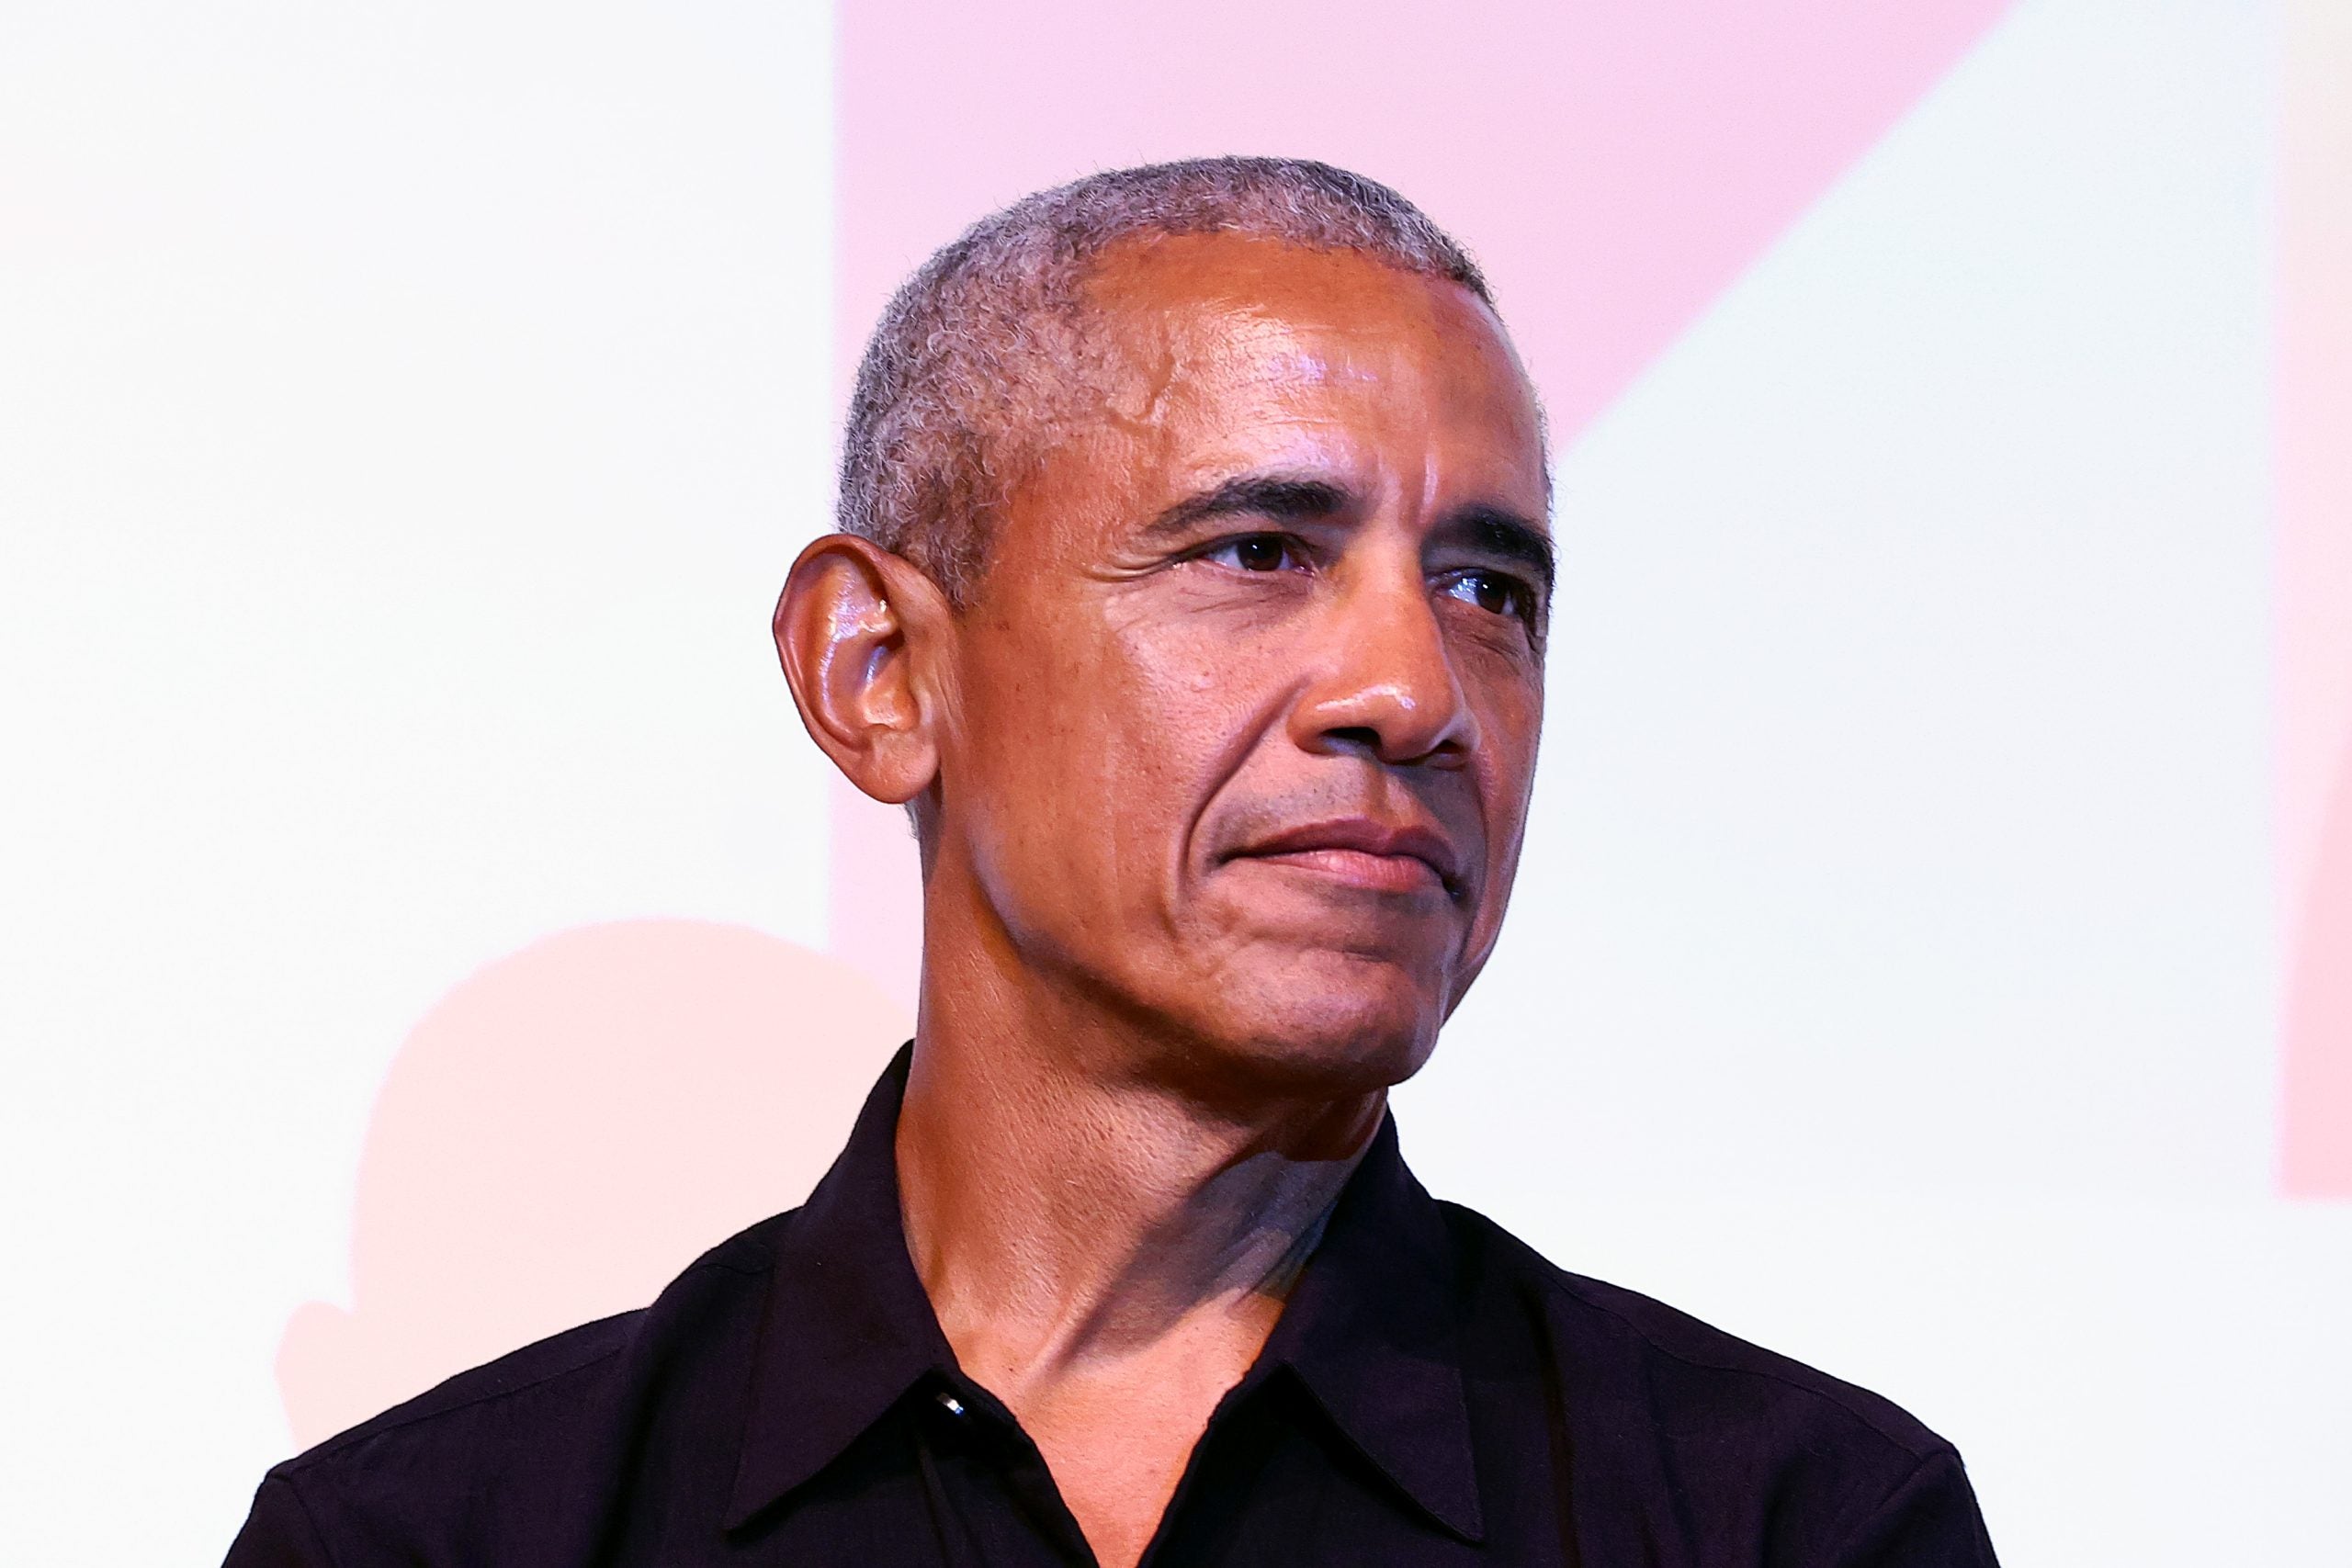 Barack And Michelle Obama Attend Martha’s Vineyard African-American Film Festival